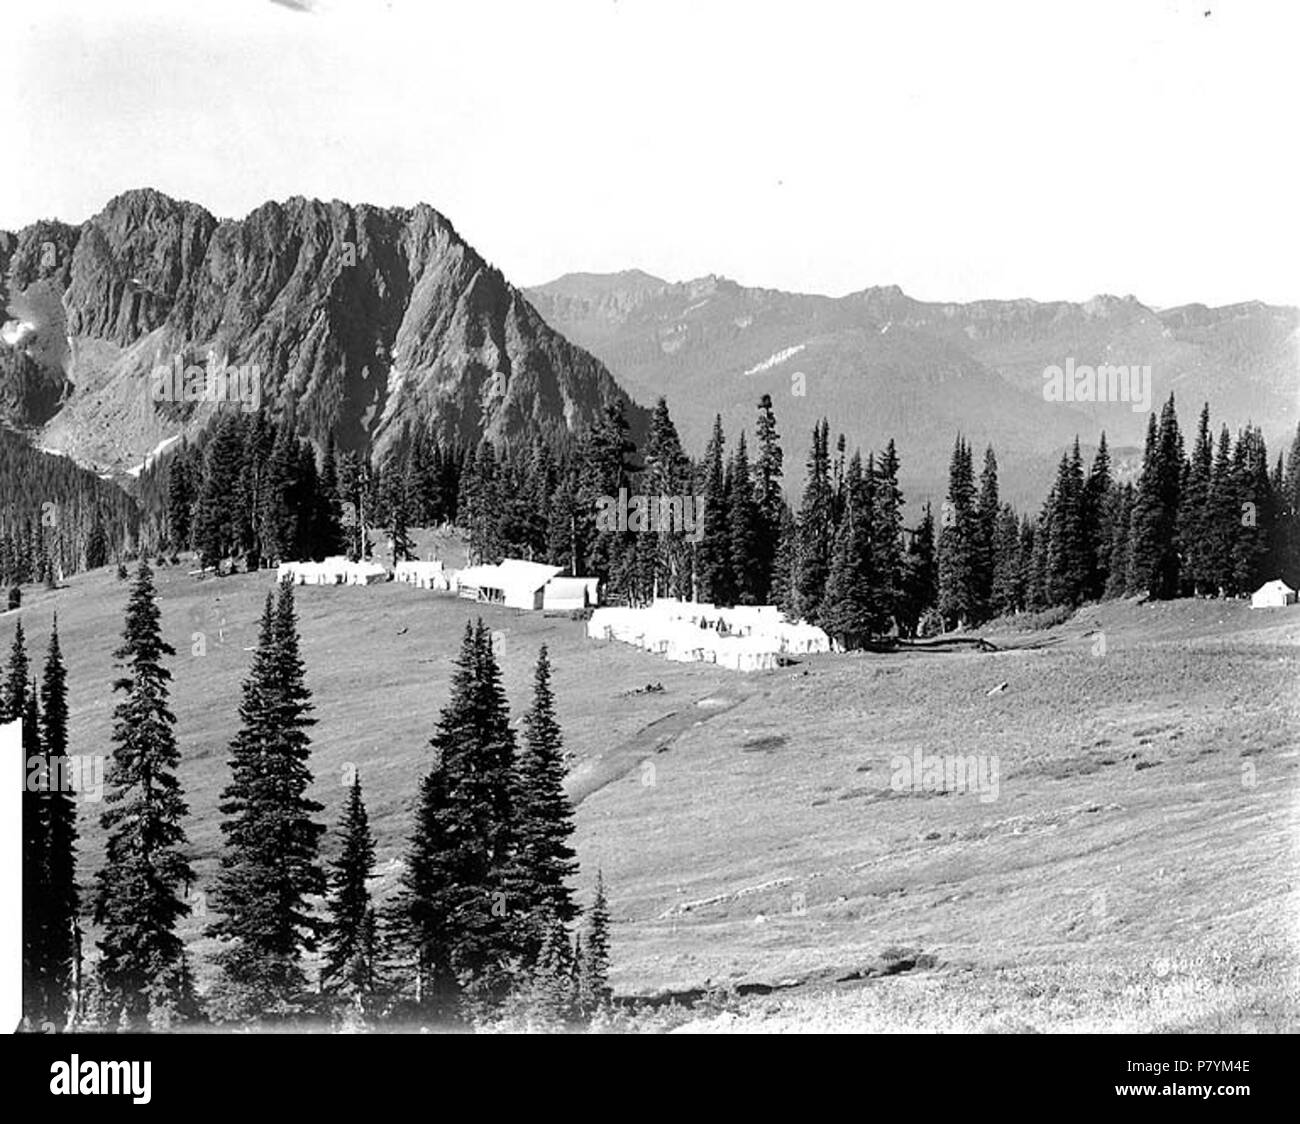 . English: John Reese's hotel tent camp known as Camp of the Clouds, Alta Vista, upper Paradise Valley, Mount Rainier National Park, Washington, 1910. English: On sleeve of negative: Mt. Tacoma. Paradise. Reeses camp 1910 Subjects (LCTGM): Tents--Washington (State)--Mount Rainier National Park; Valleys--Washington (State) Subjects (LCSH): Camp sites, facilities, etc.--Washington (State)--Mount Rainier National Park; Camp of the Clouds (Wash.); Paradise Valley (Lewis County and Pierce County, Wash.); Mount Rainier National Park (Wash.)  . 1910 222 John Reese's hotel tent camp known as Camp of t Stock Photo